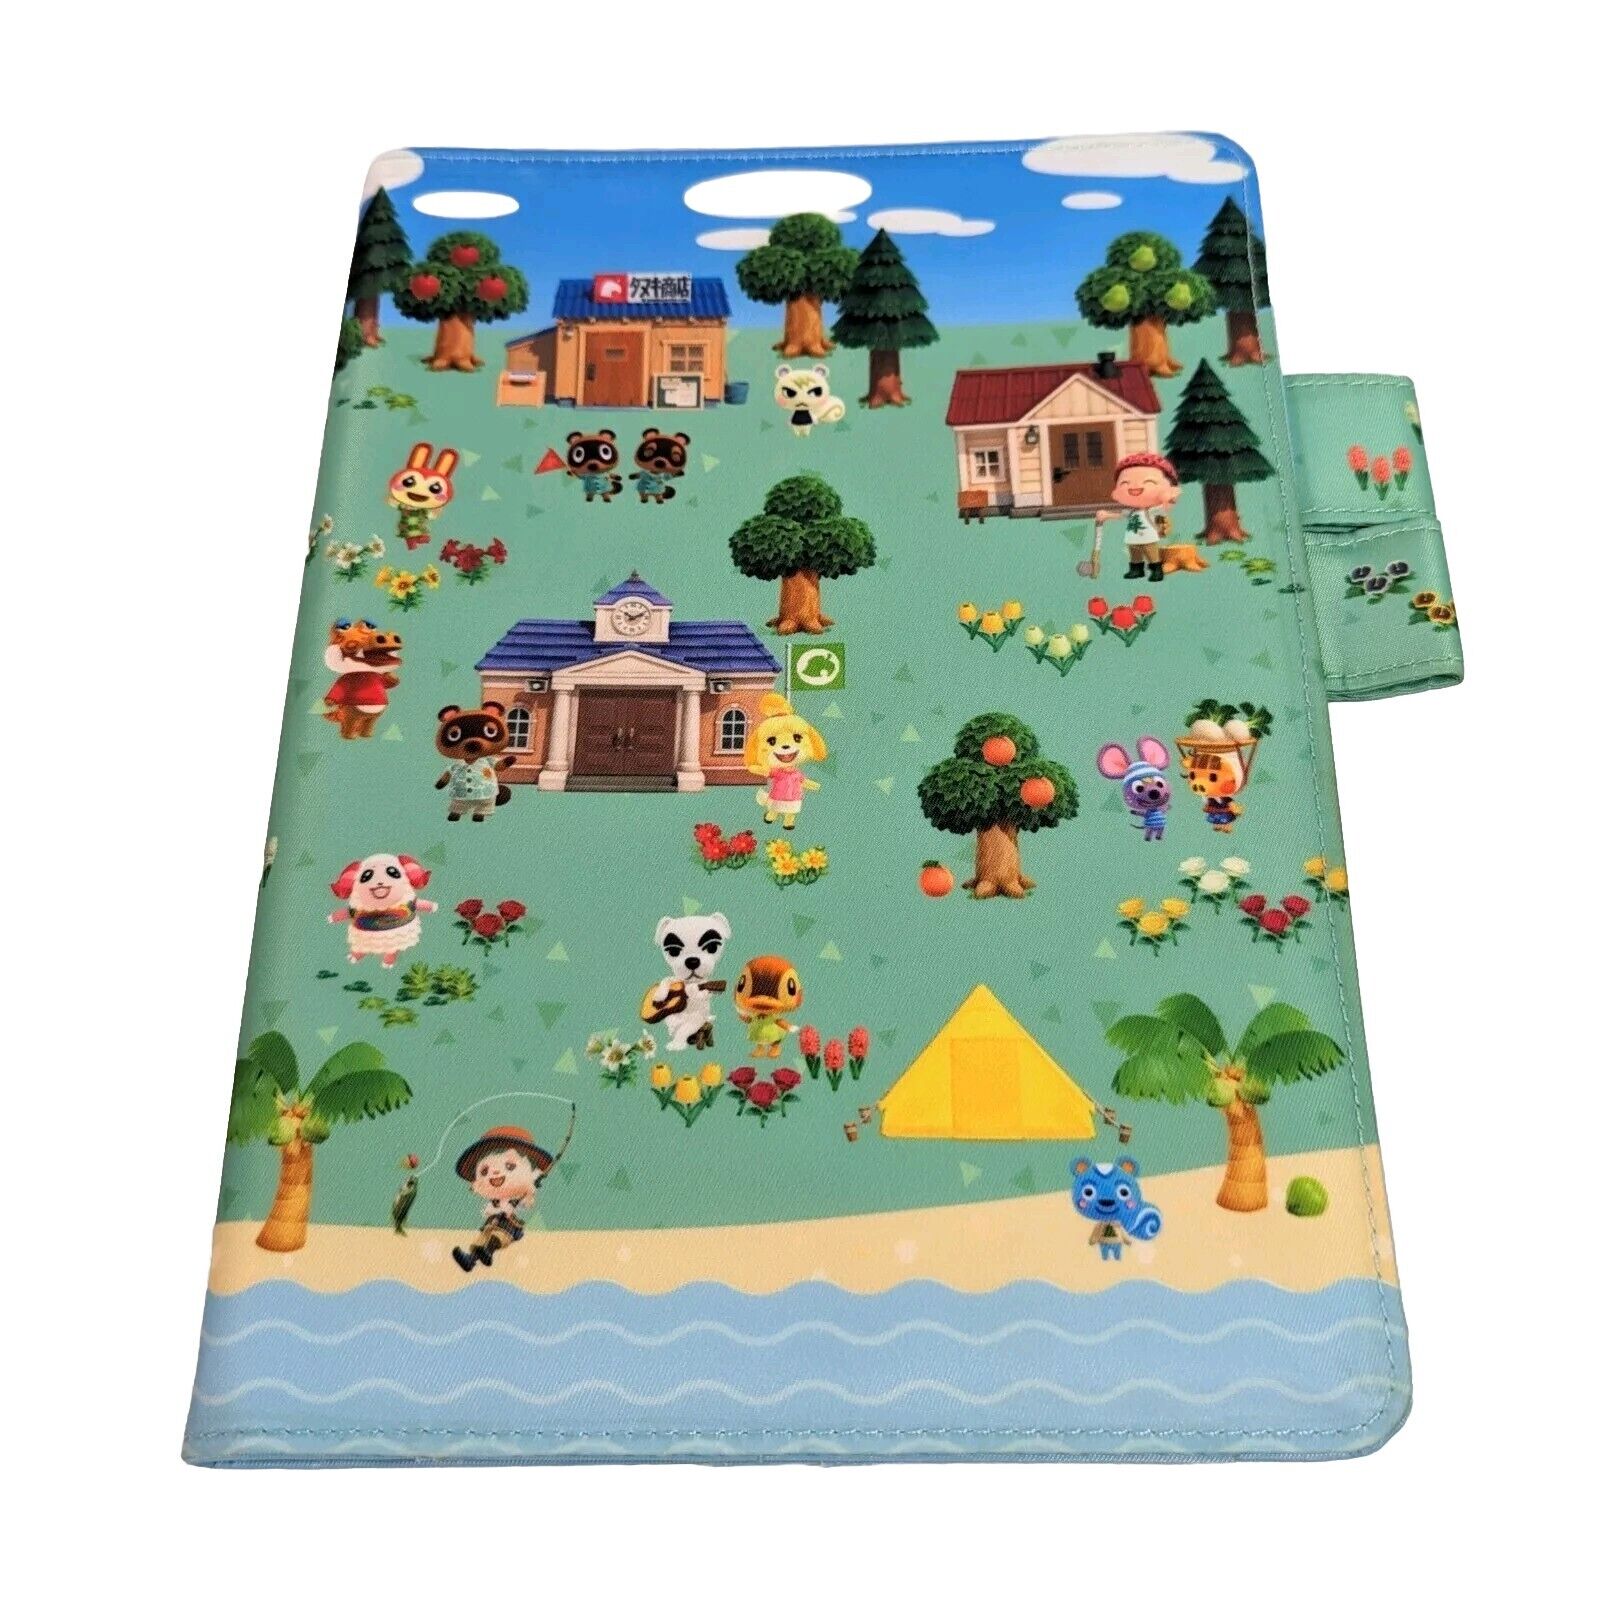 Hobonichi Techo Planner Cover Animal Crossing New Horizons A5 Cousin Size Unused